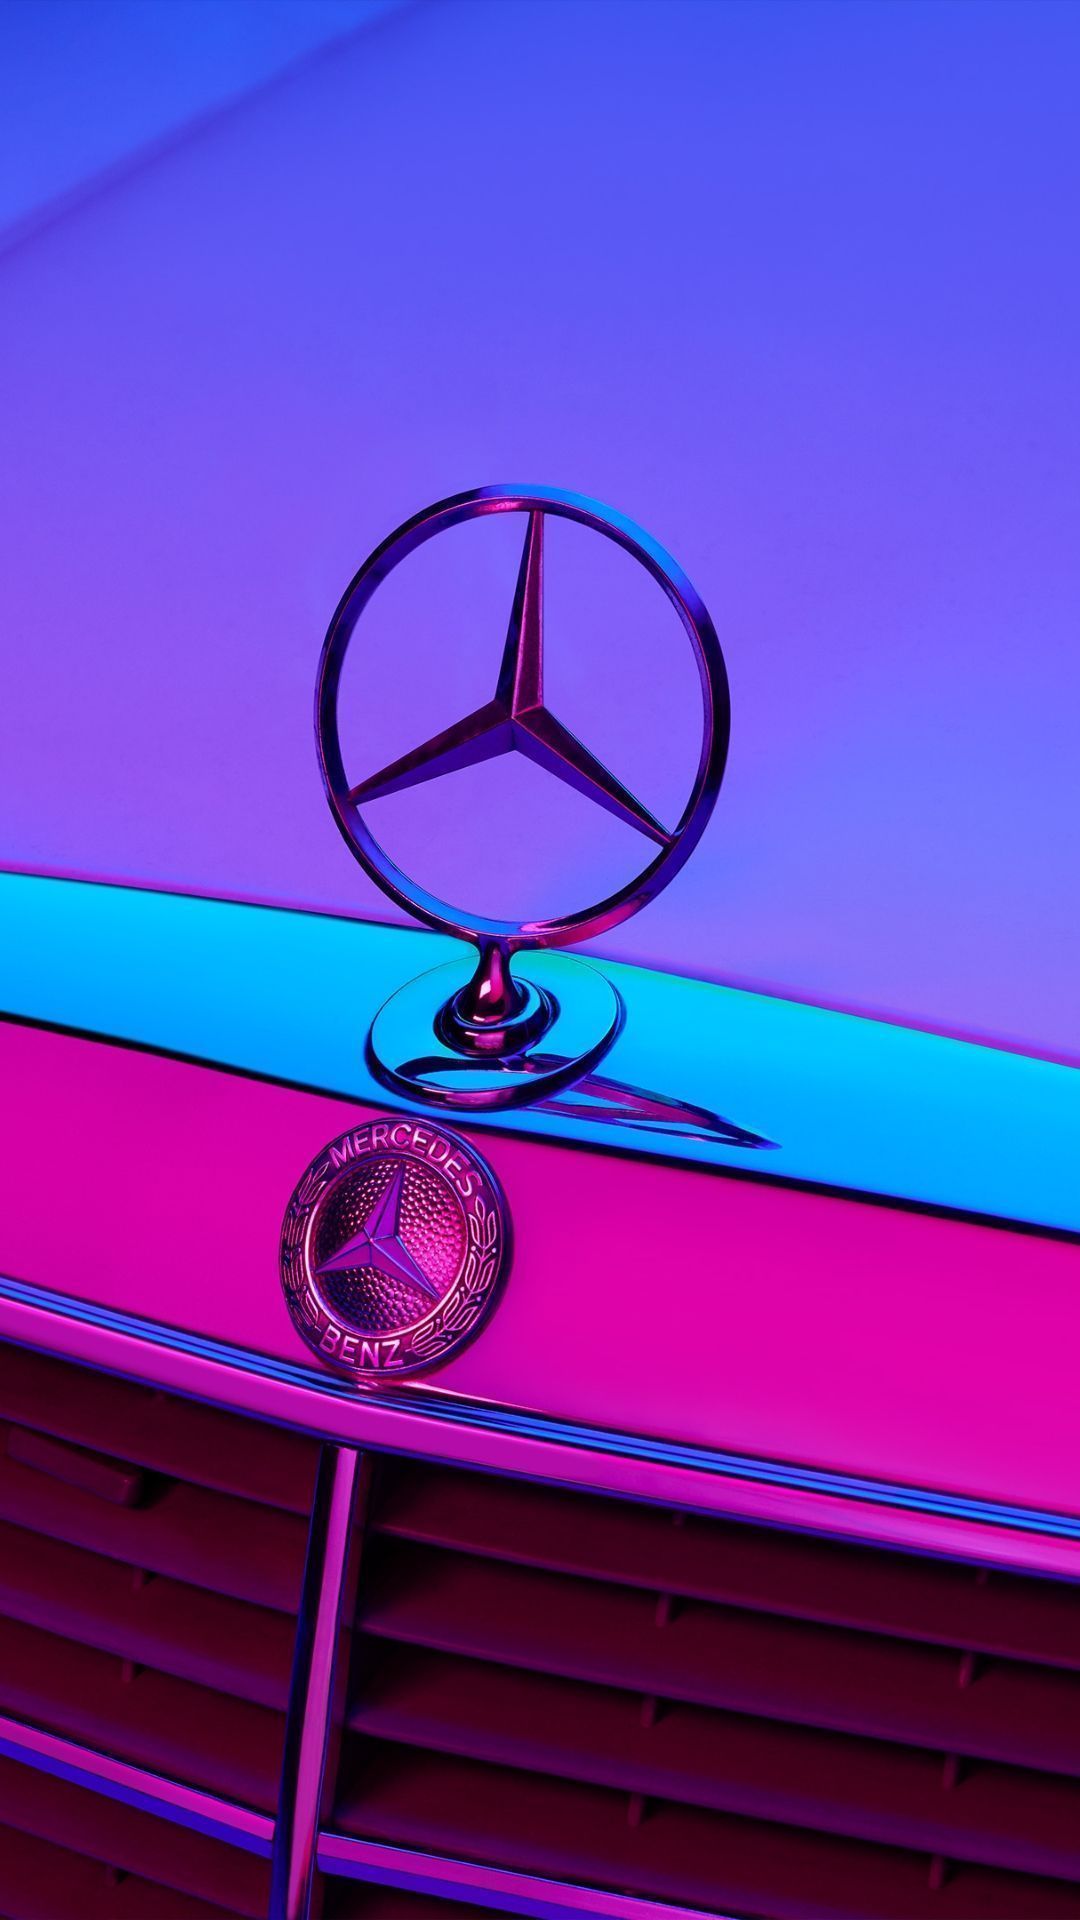 Mercedes Benz wallpaper for iPhone with high-resolution 1080x1920 pixel. You can use this wallpaper for your iPhone 5, 6, 7, 8, X, XS, XR backgrounds, Mobile Screensaver, or iPad Lock Screen - Neon, violet, neon purple, purple, colorful